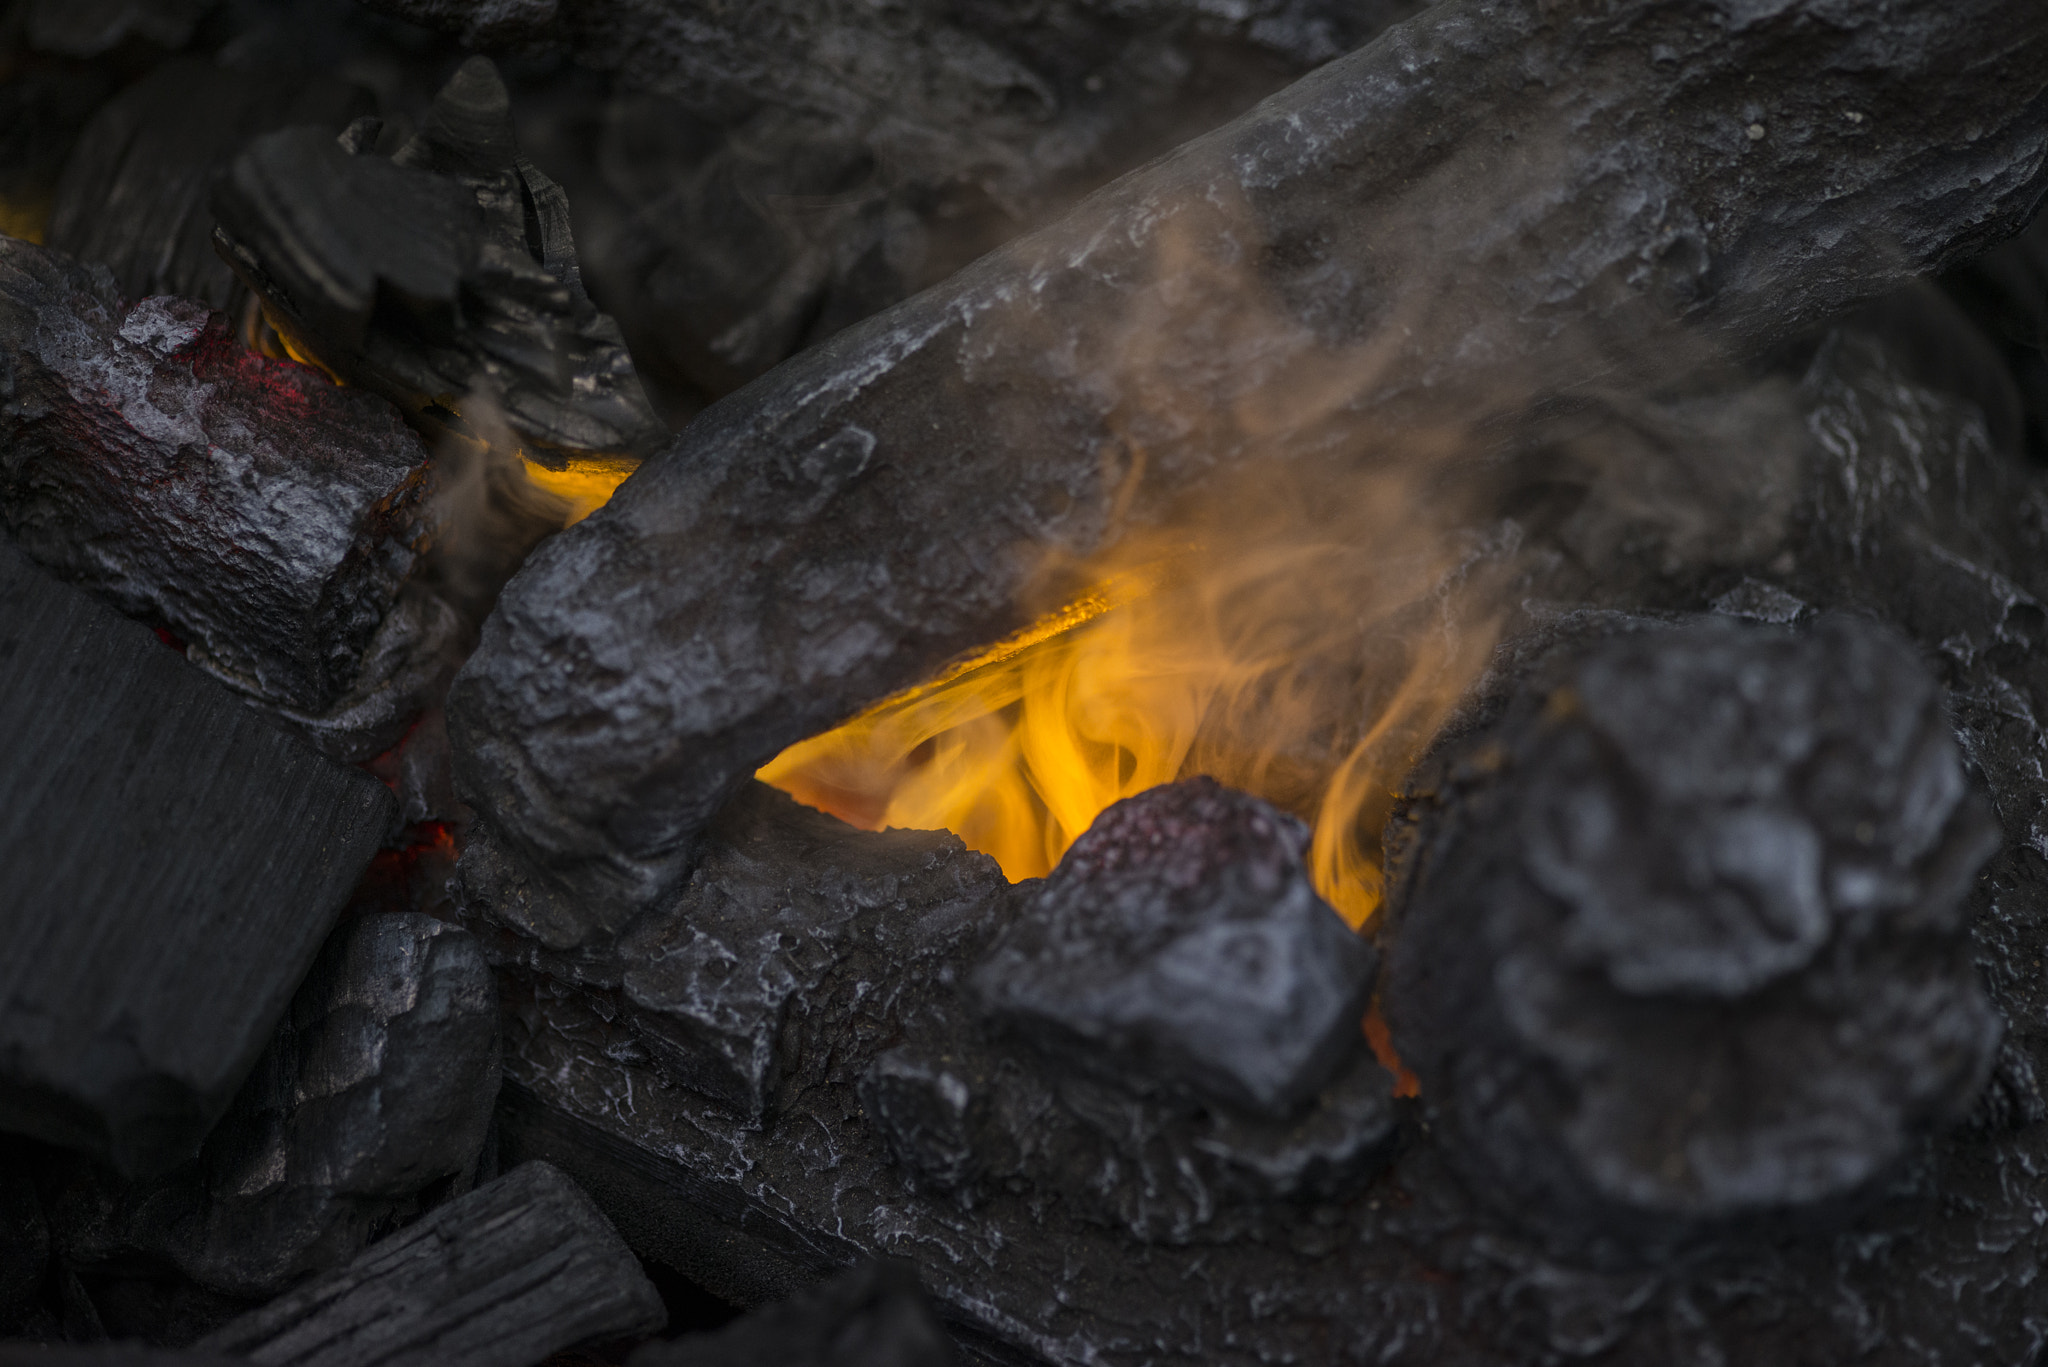 Nikon D800 + Sigma 105mm F2.8 EX DG Macro sample photo. Close up of flames in log fire in cozy warm winter fireplace photography